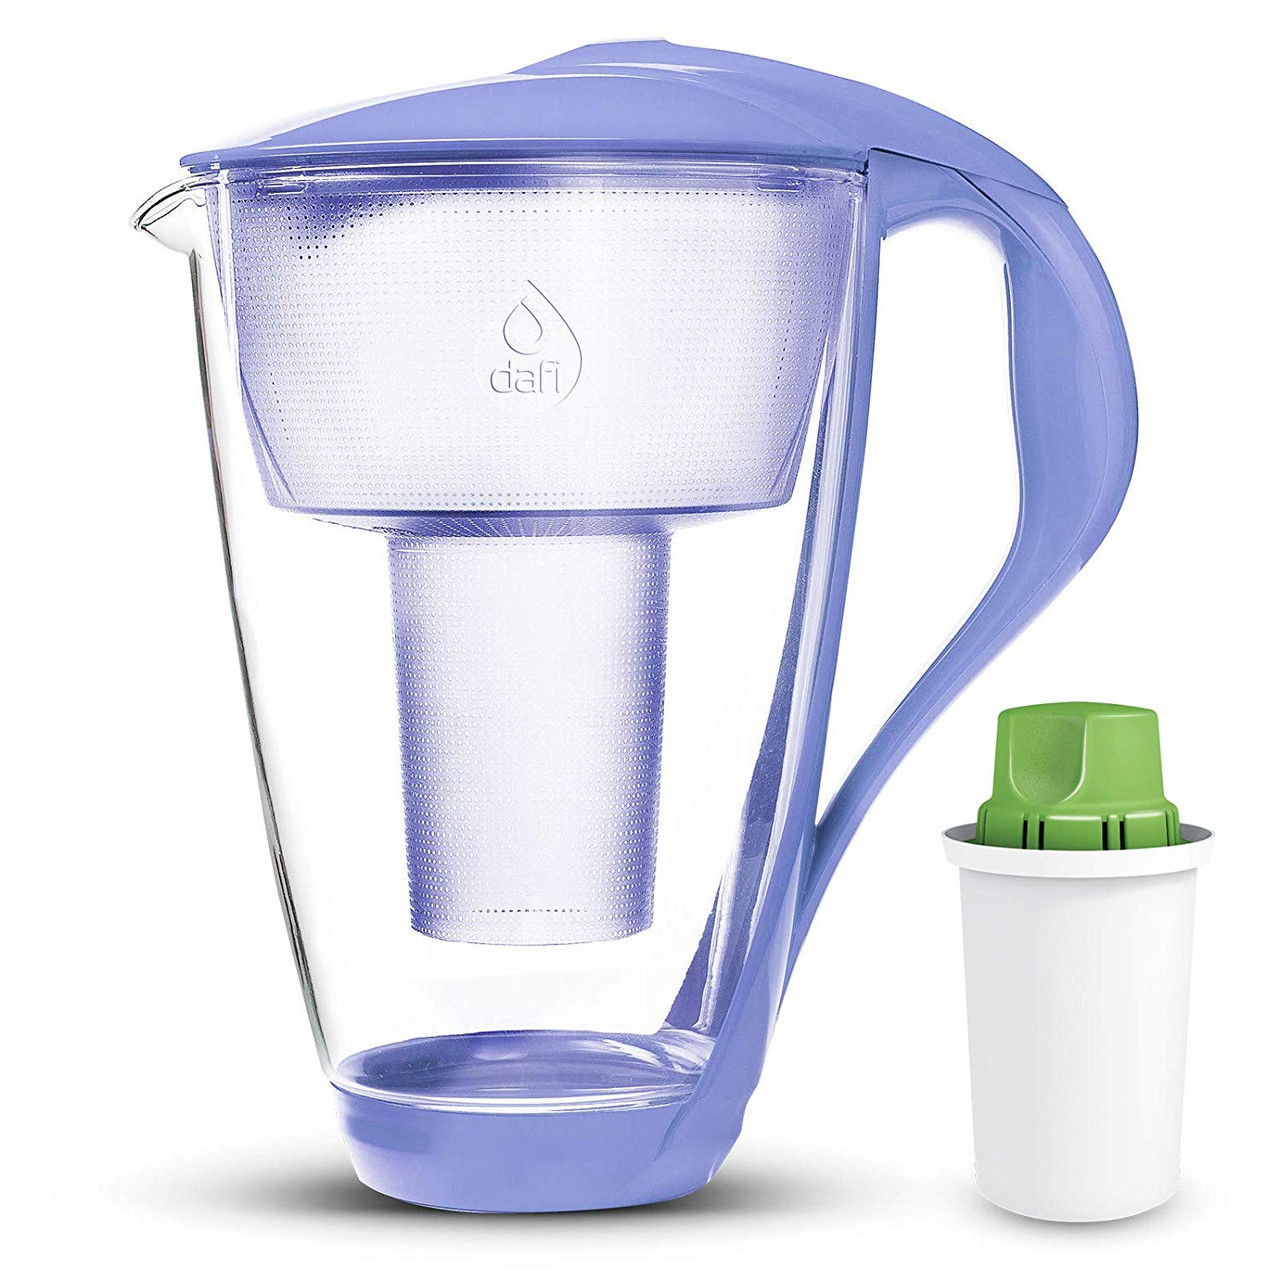 https://cdn11.bigcommerce.com/s-tfx2bzvypw/images/stencil/1280x1280/products/117/2359/Dafi_Alkaline_UP_Crystal_Pitcher_8_cups_-_Innovative_Alkaline_Water_System_-_Glass_Water_Pitcher_-_Highest_Quality_Laboratory_Borosilicate_Glass_With_Ergonomic_BPA_Free_Plastic_Parts_Violet-1__01778.1654711878.jpg?c=2